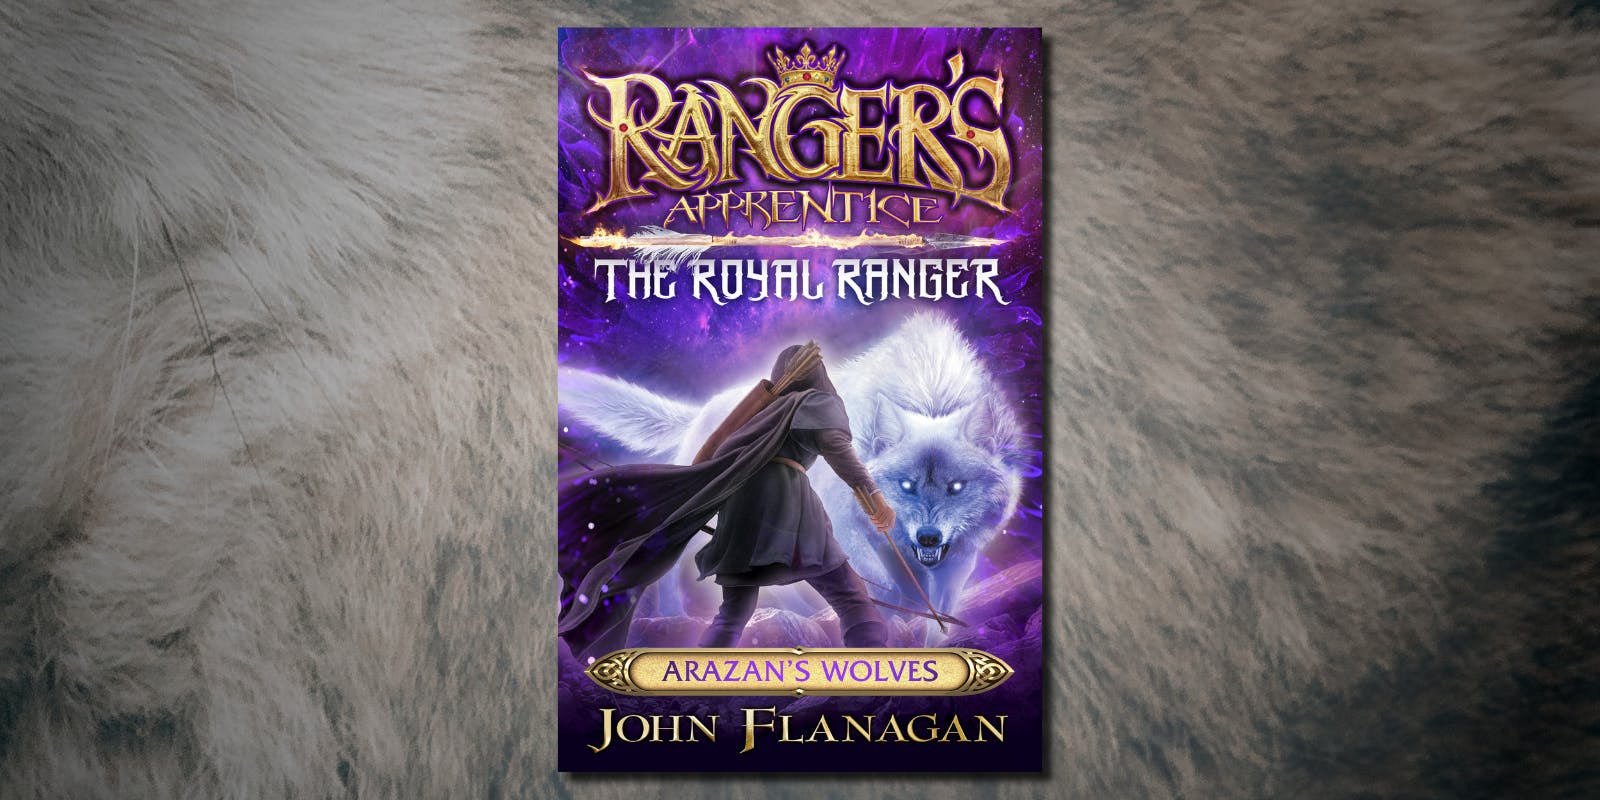 John Flanagan's new book was partially inspired by a popular TV series